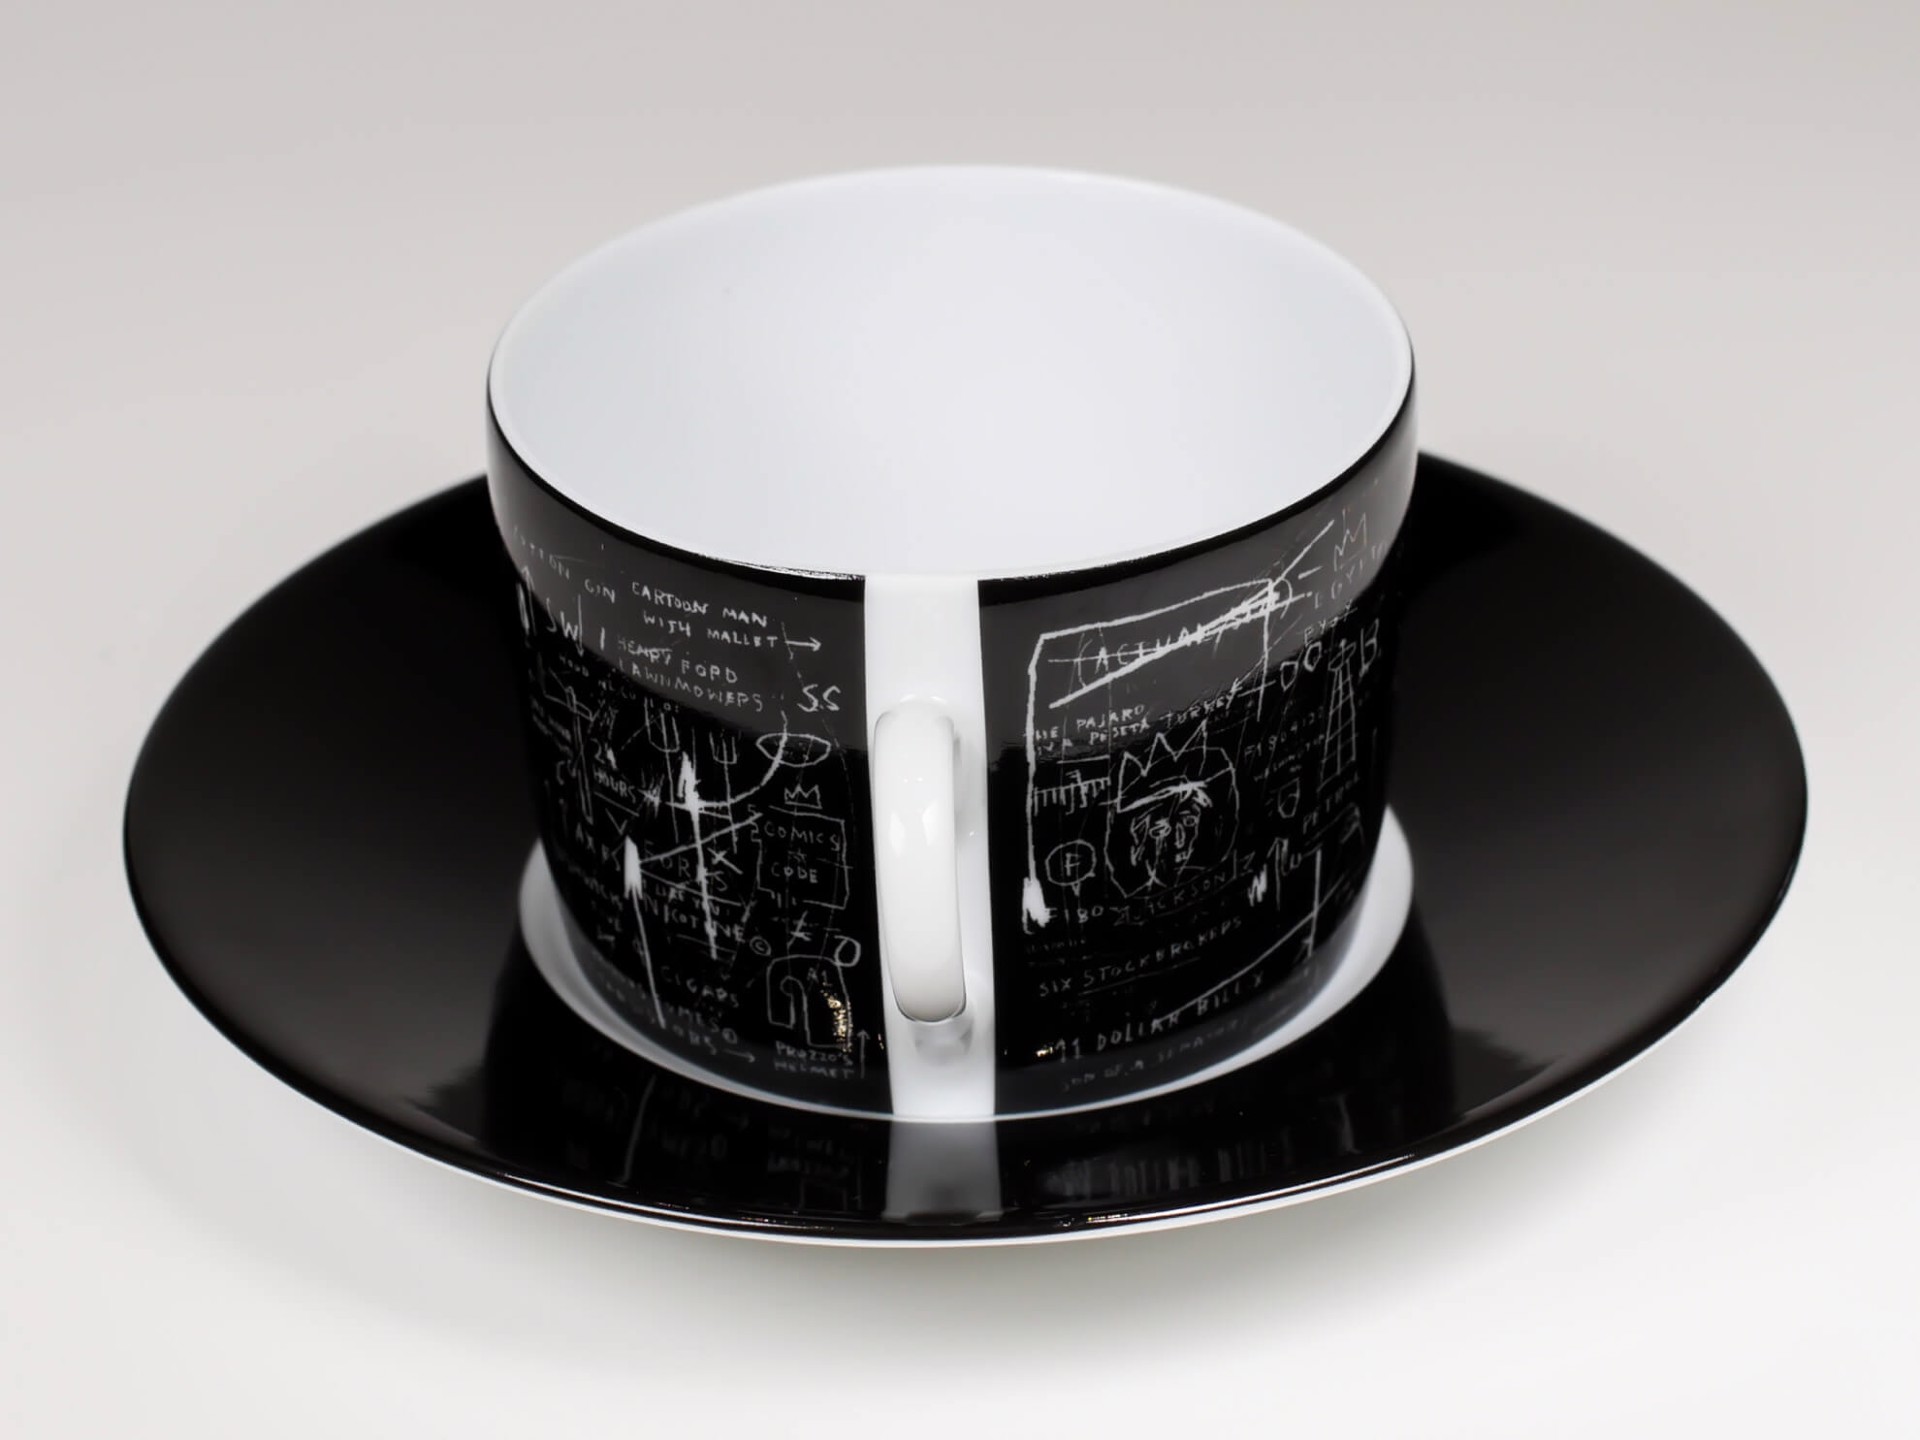 Tuxedo Porcelain Tea Cup and Plate by Jean-Michel Basquiat